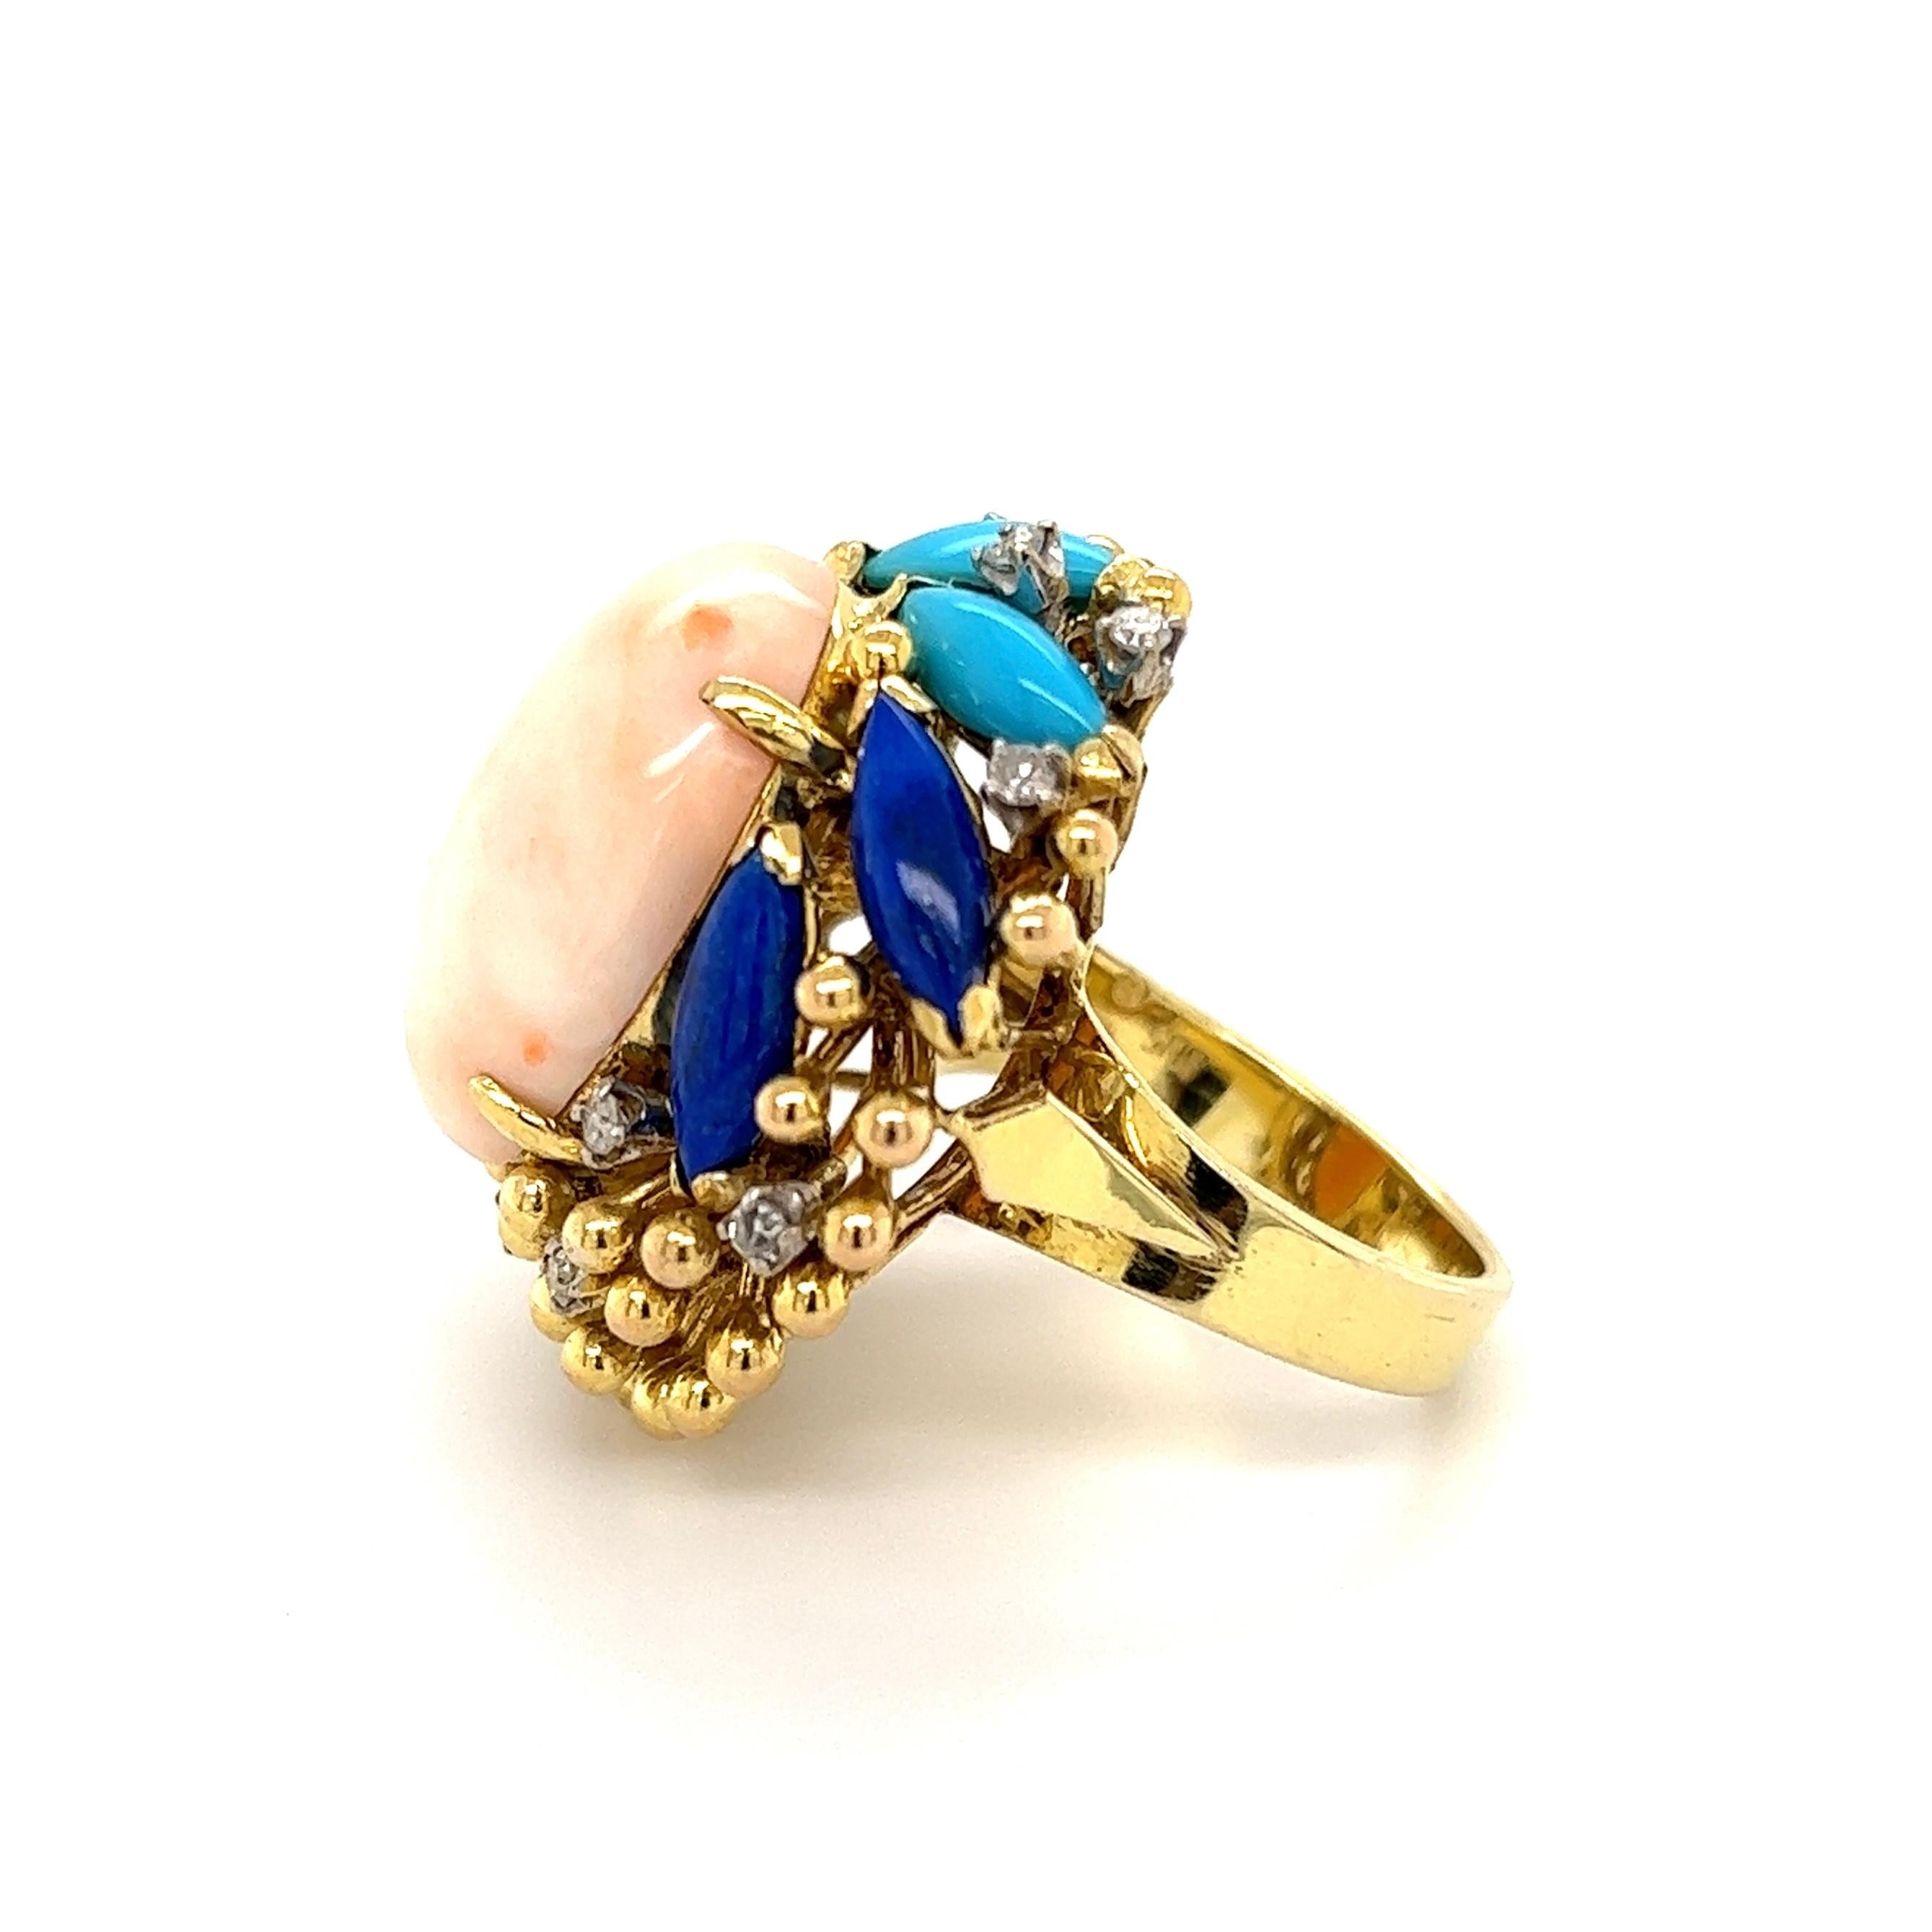 Mixed Cut Angelskin Coral Turquoise Lapis and Diamond Gold Ring Estate Fine Jewelry For Sale